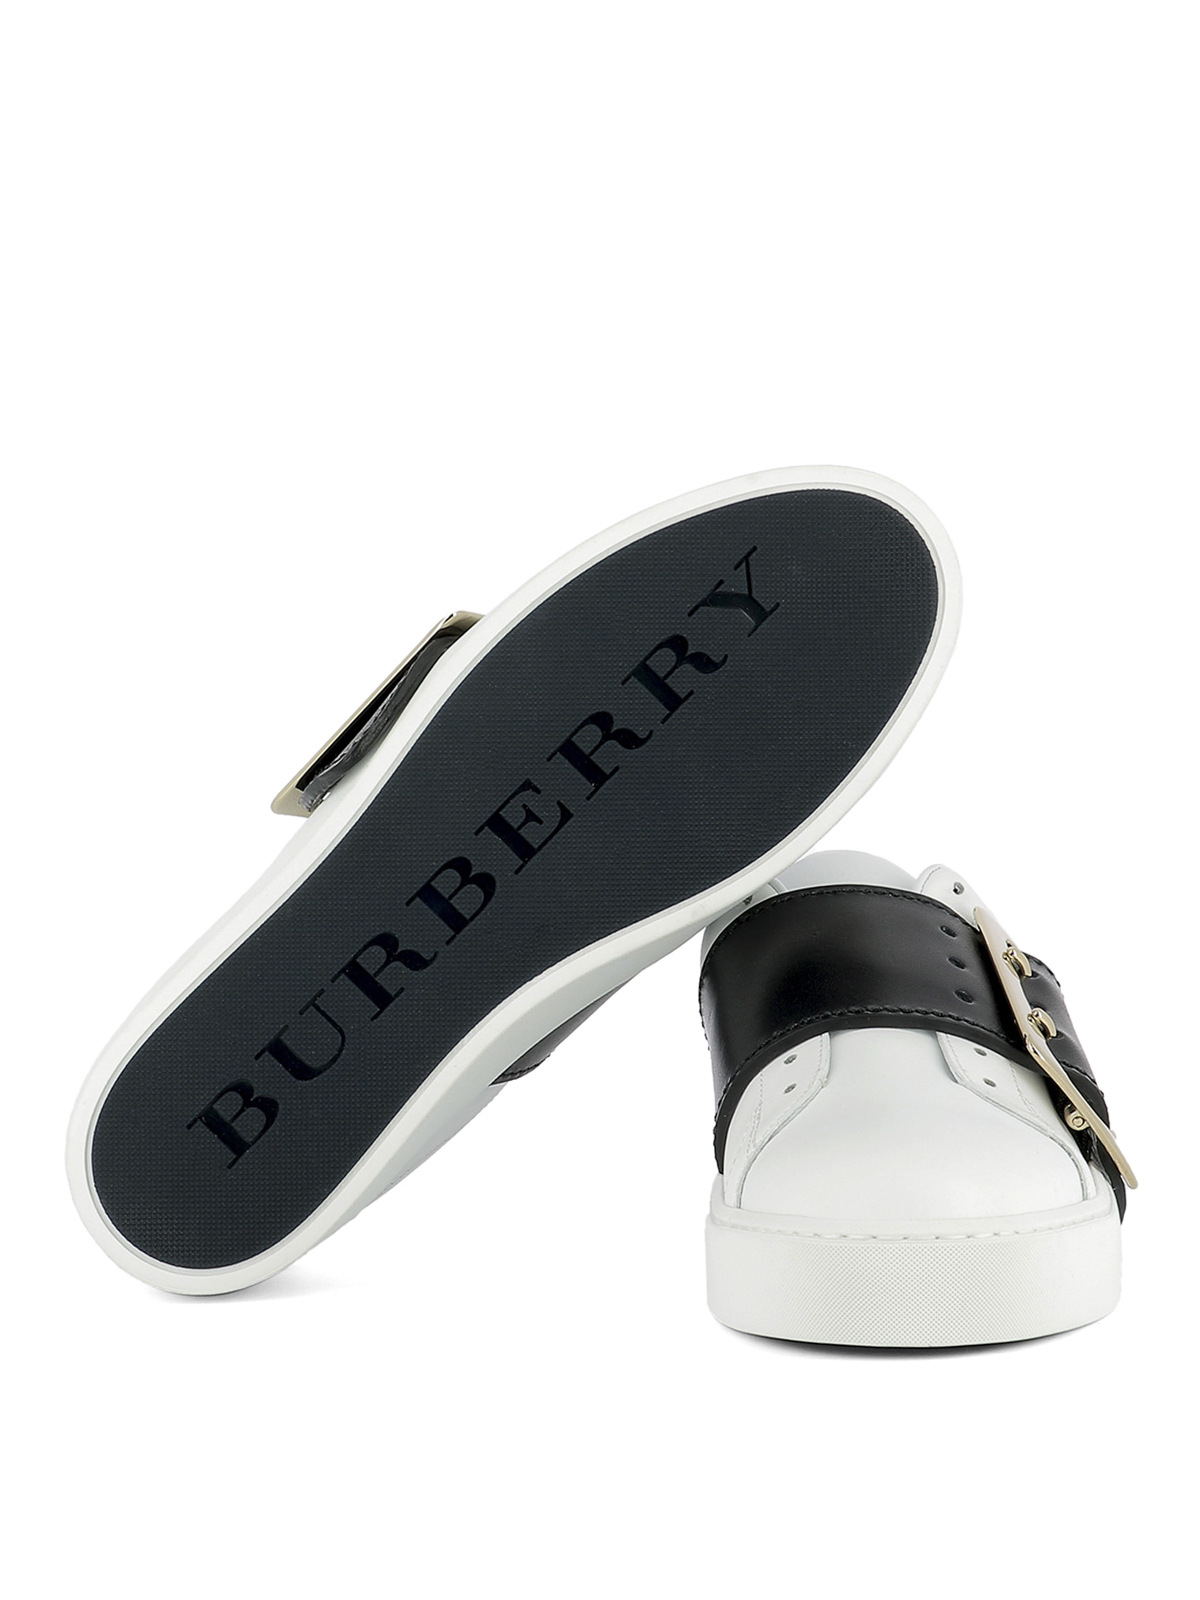 burberry westford leather sneakers